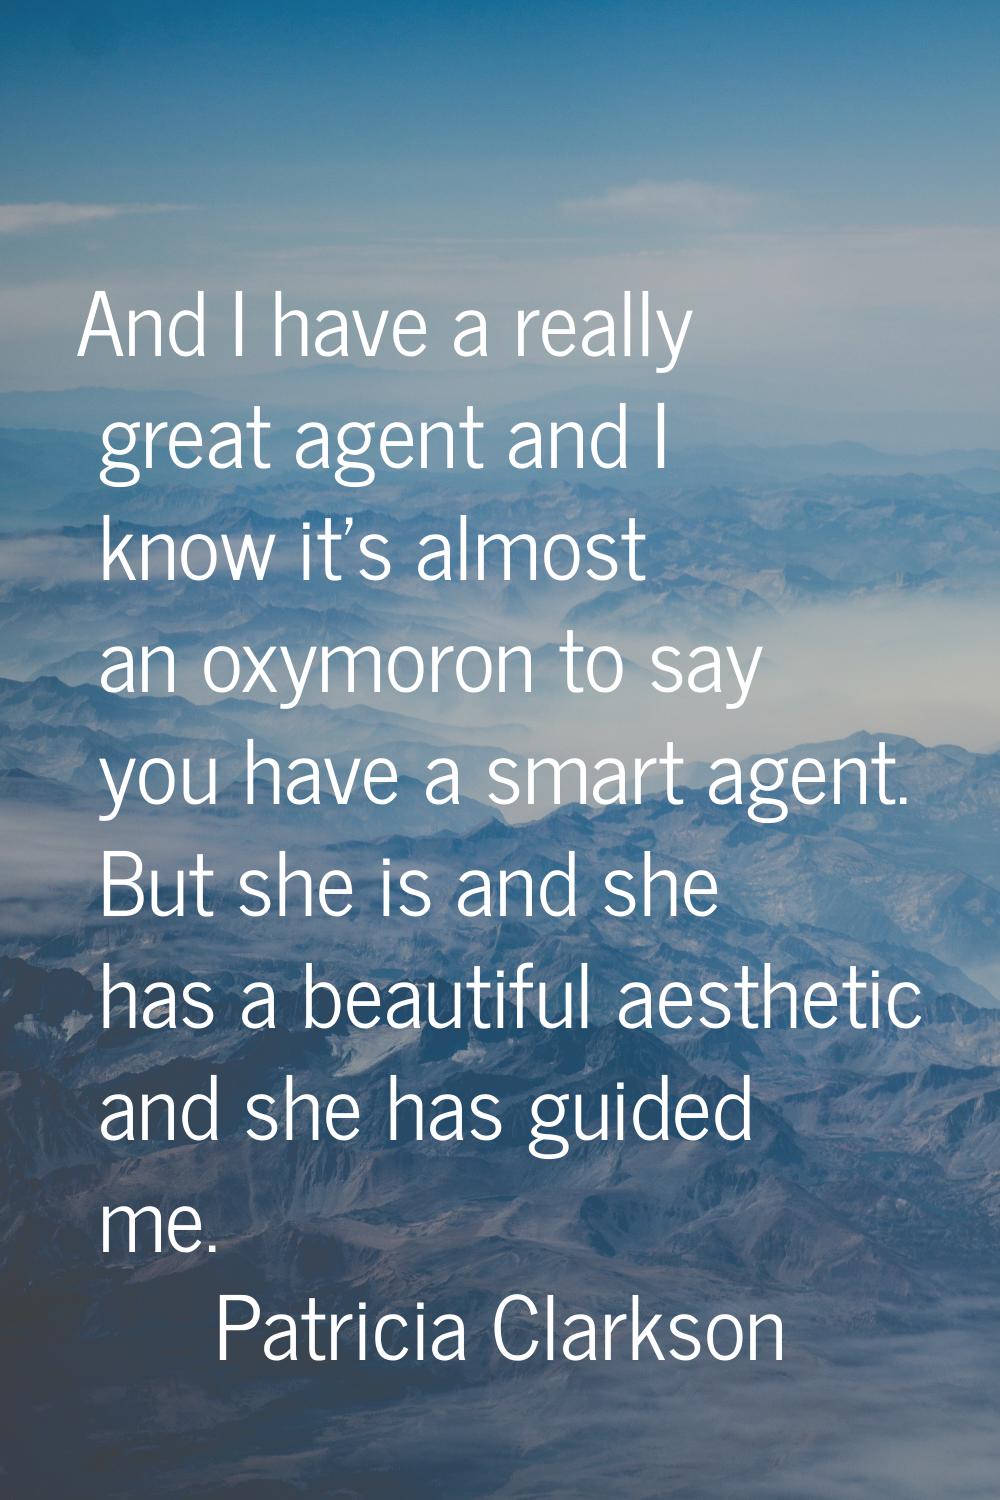 And I have a really great agent and I know it's almost an oxymoron to say you have a smart agent. B